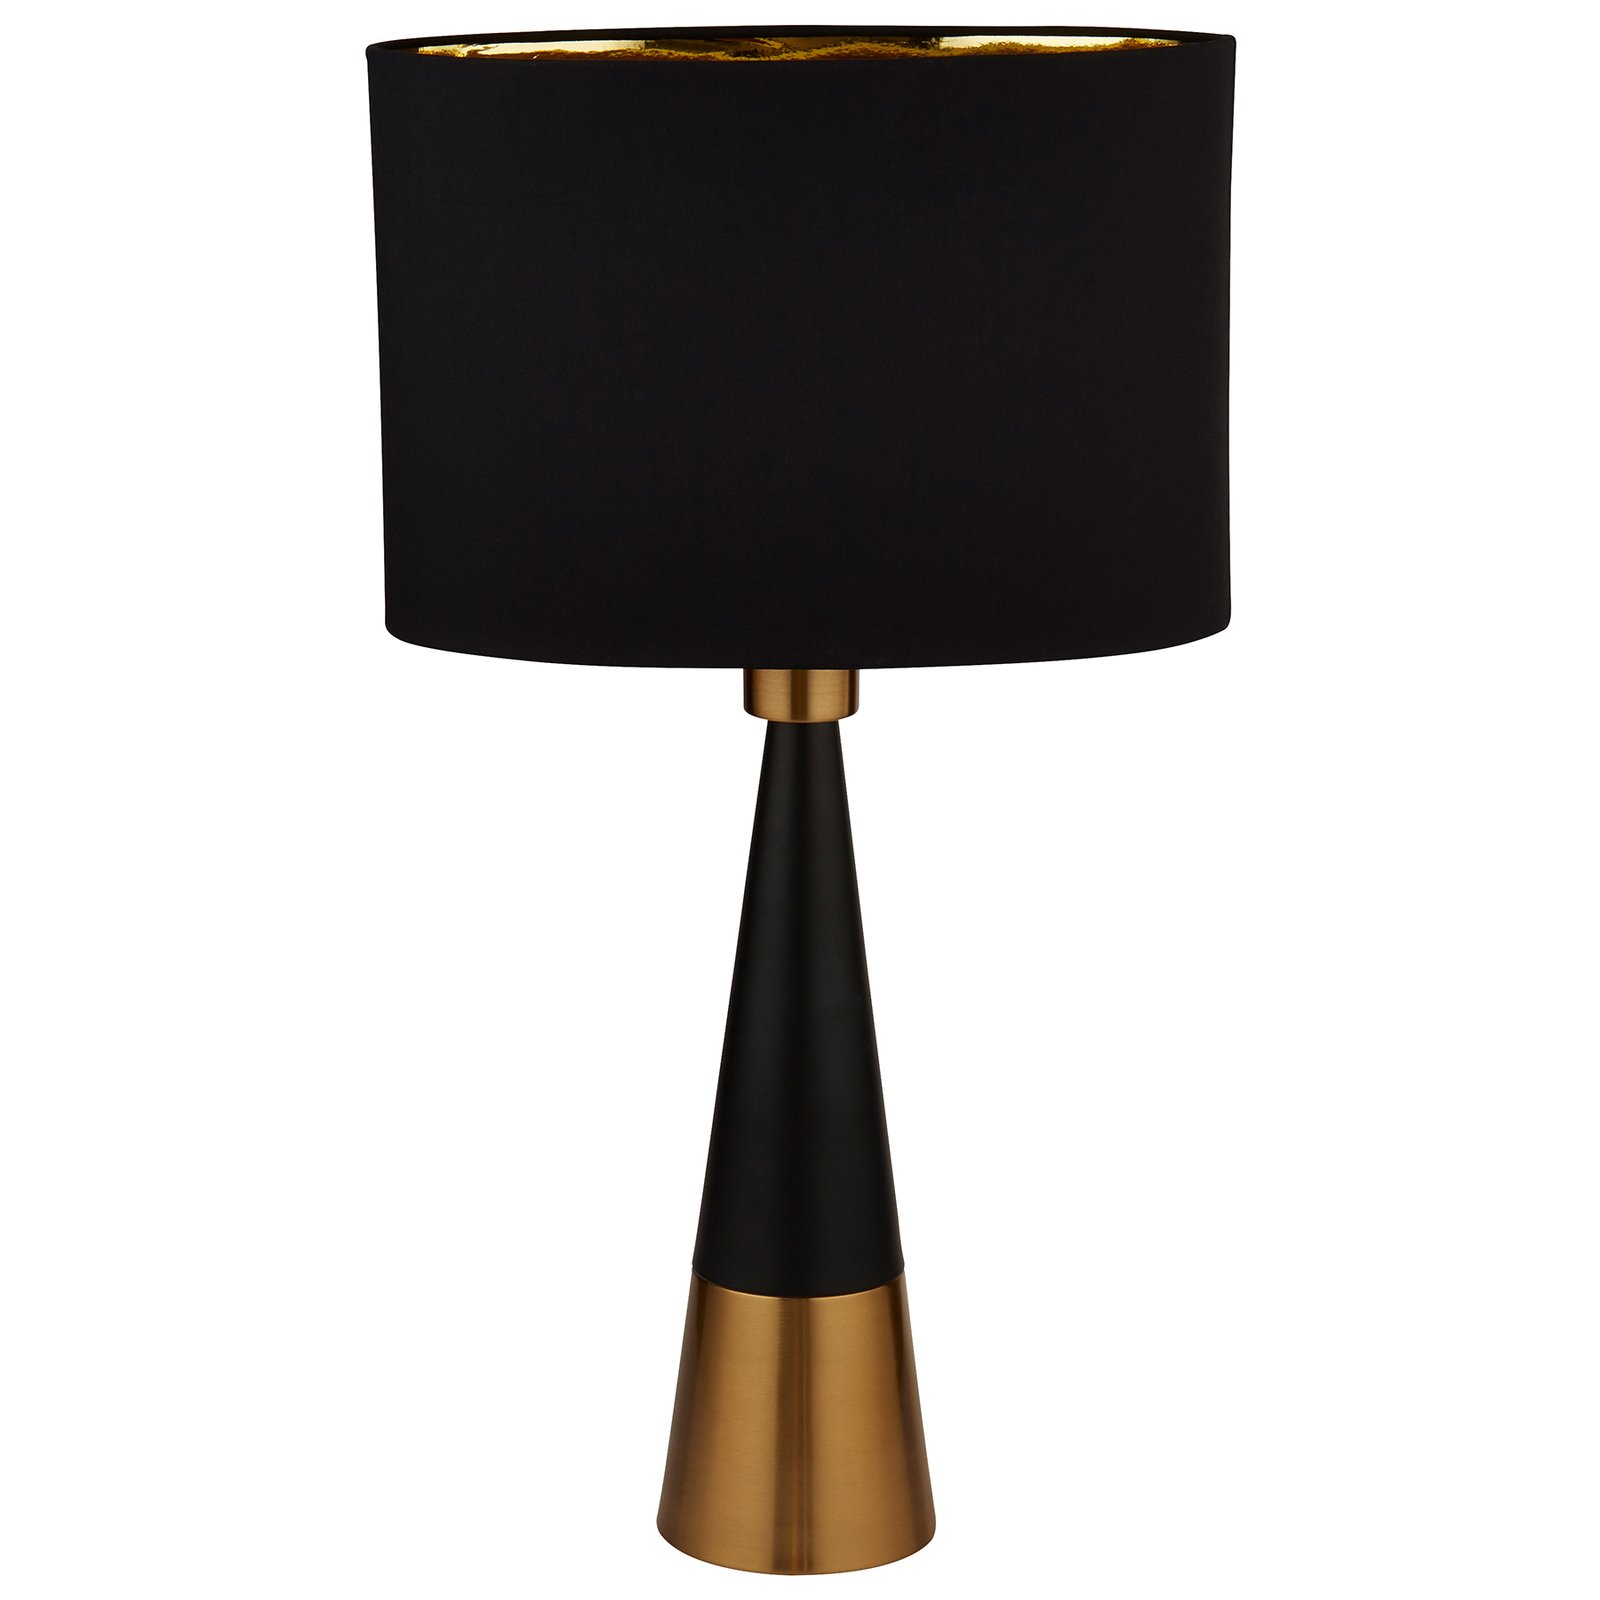 Pyramid table lamp, black and copper